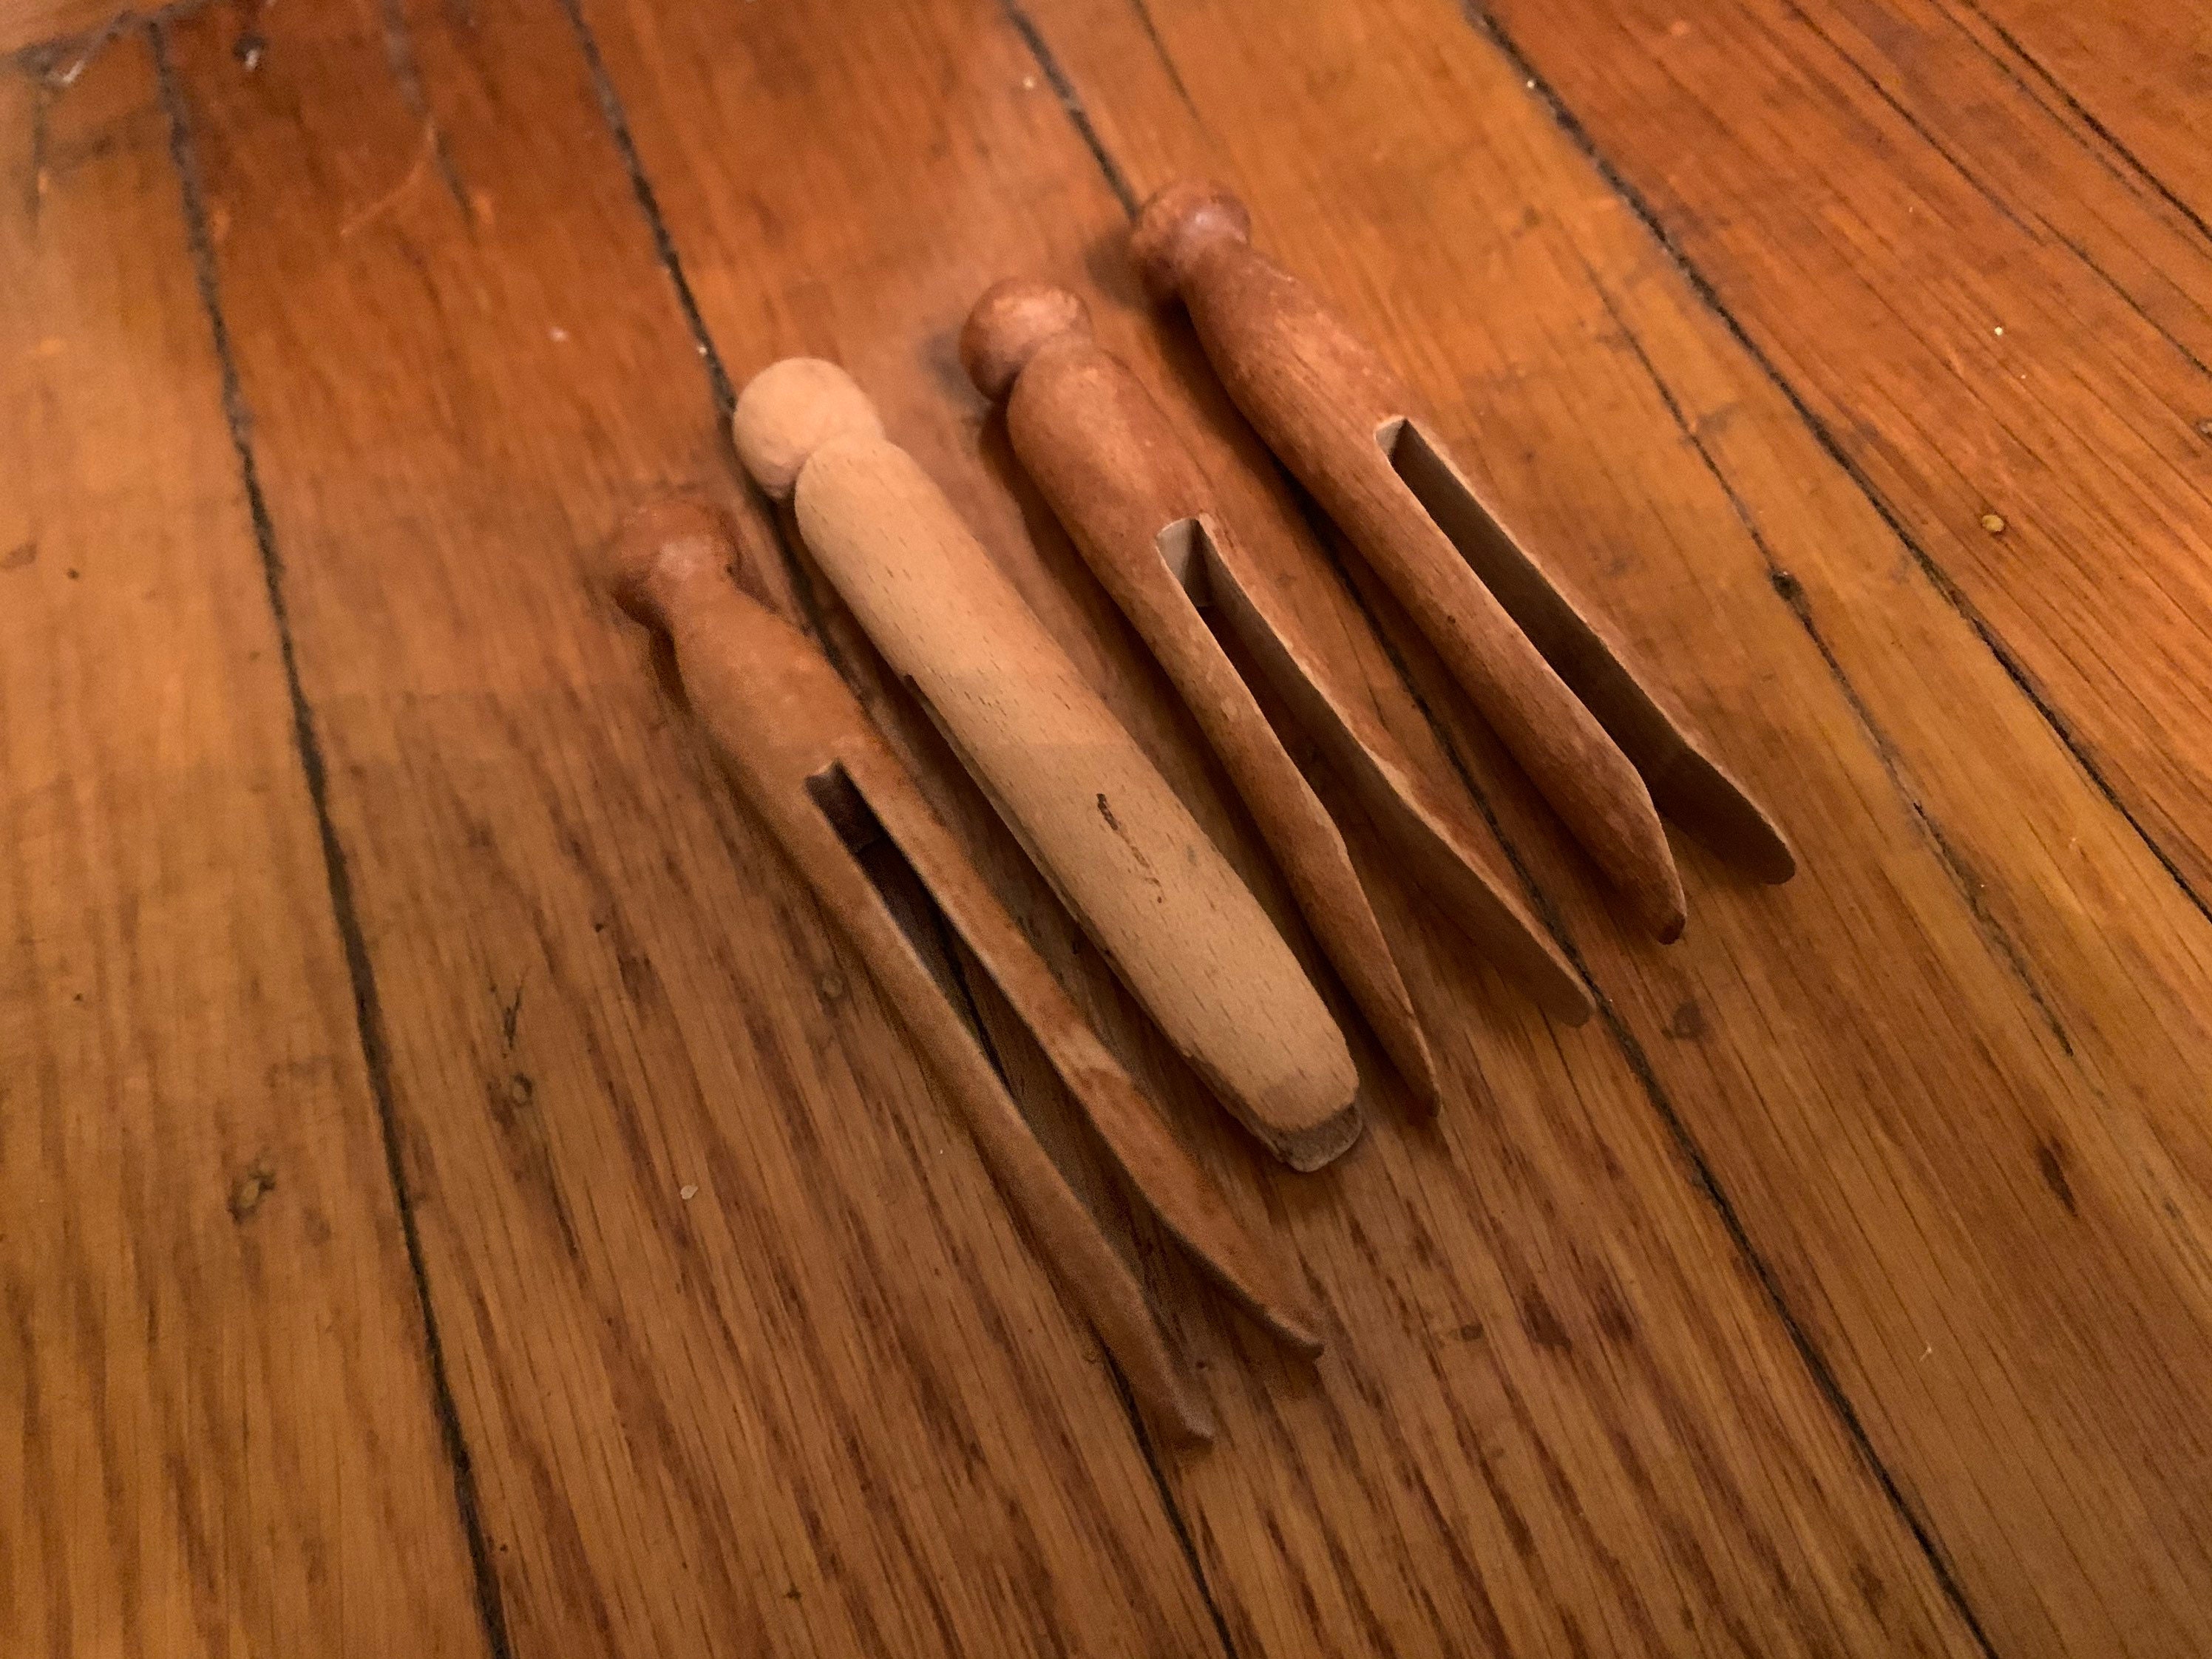 20 Vintage Flat Wooden Clothes Pins in Hand Carved Wooden Bowl